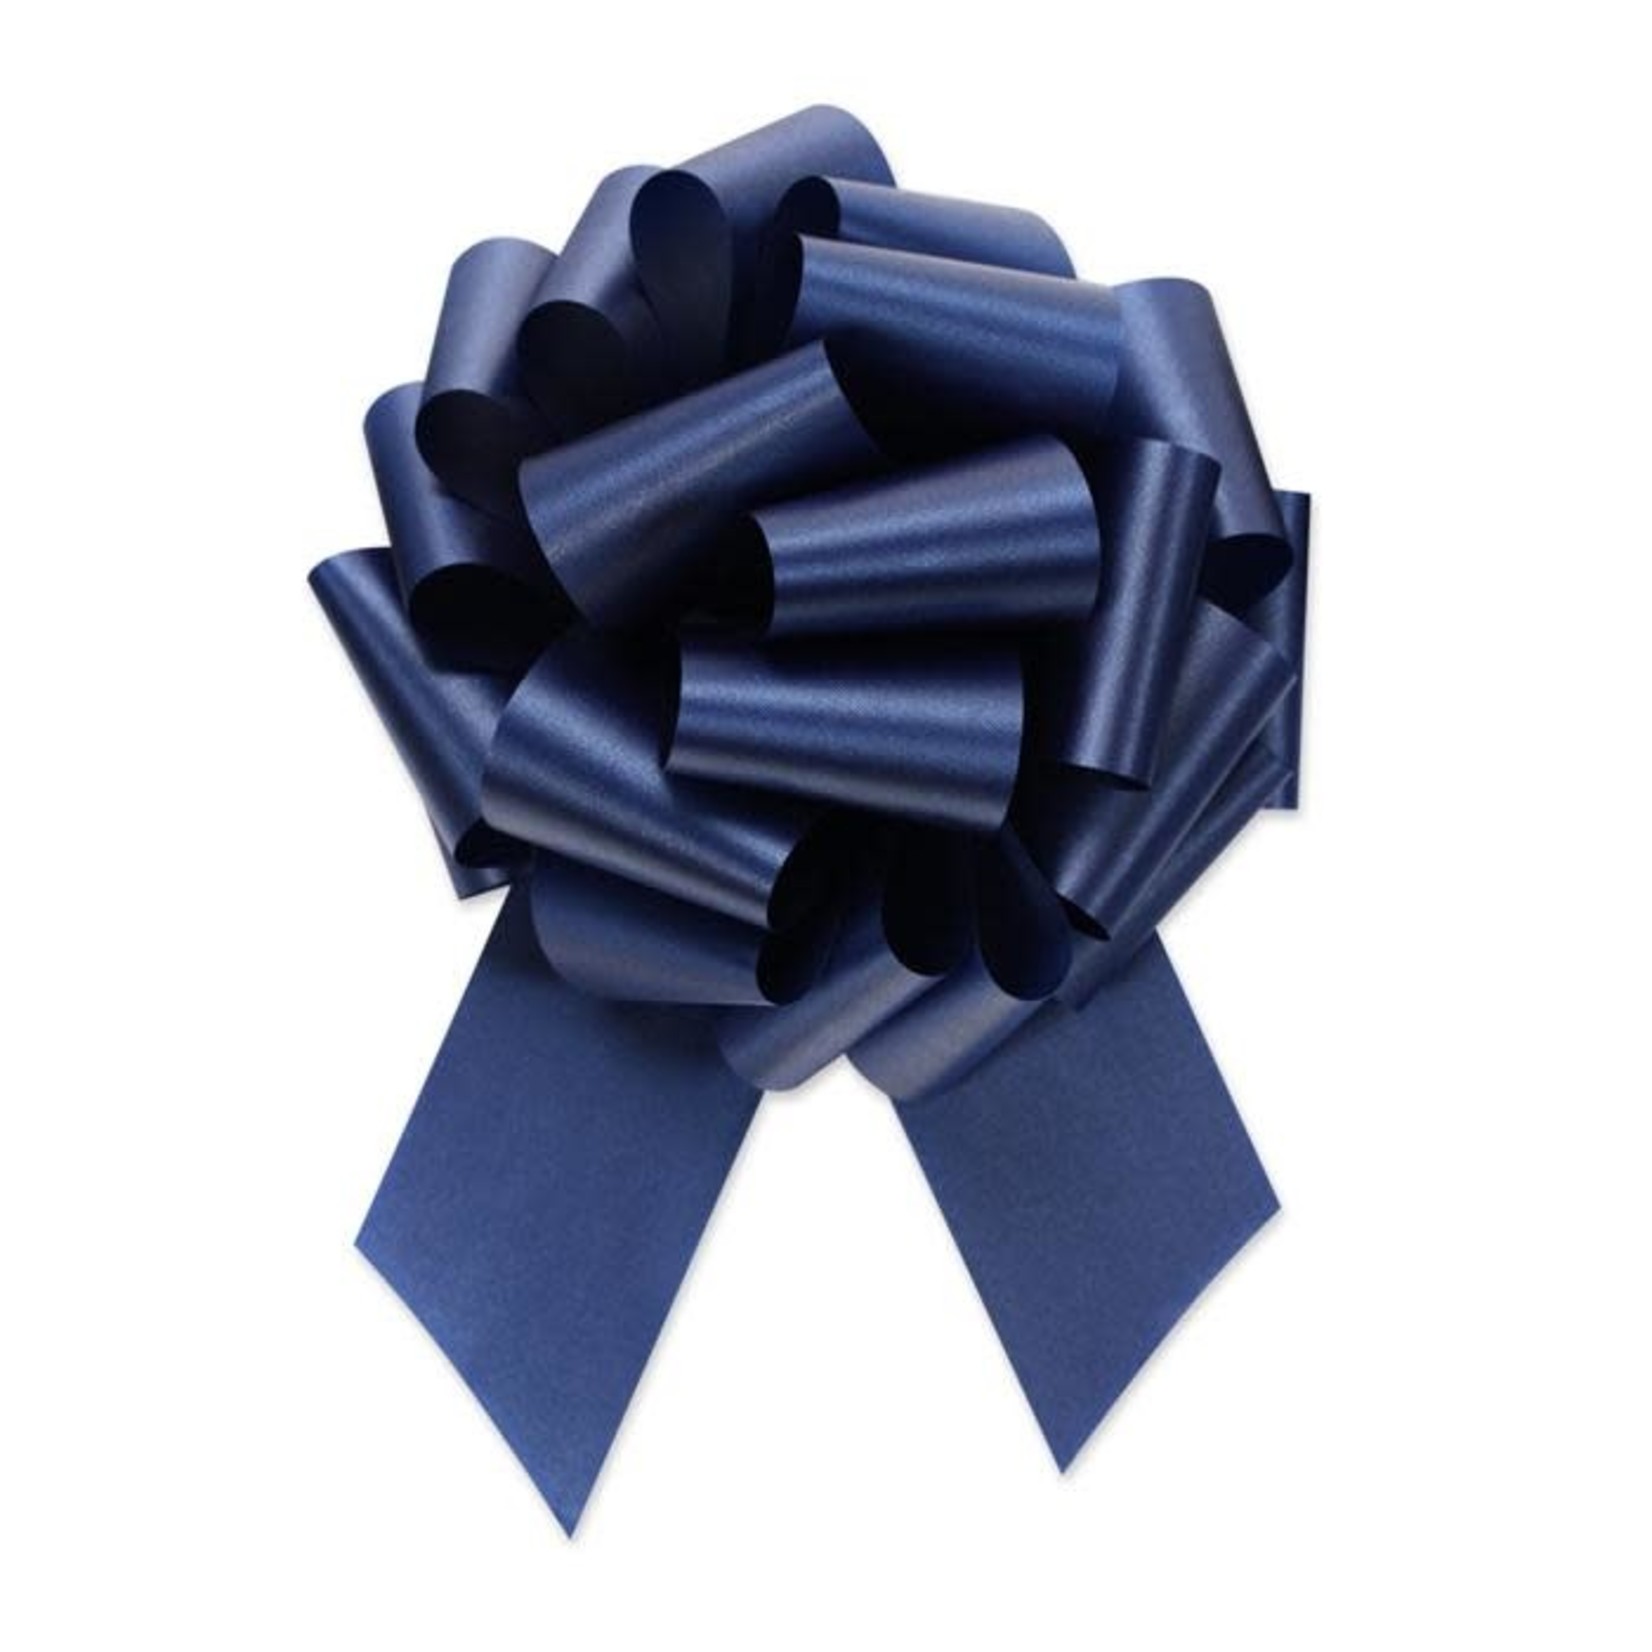 PERFECT BOW  #5 NAVY, 7/8" ribbon width, 4" bow size, 18 loops